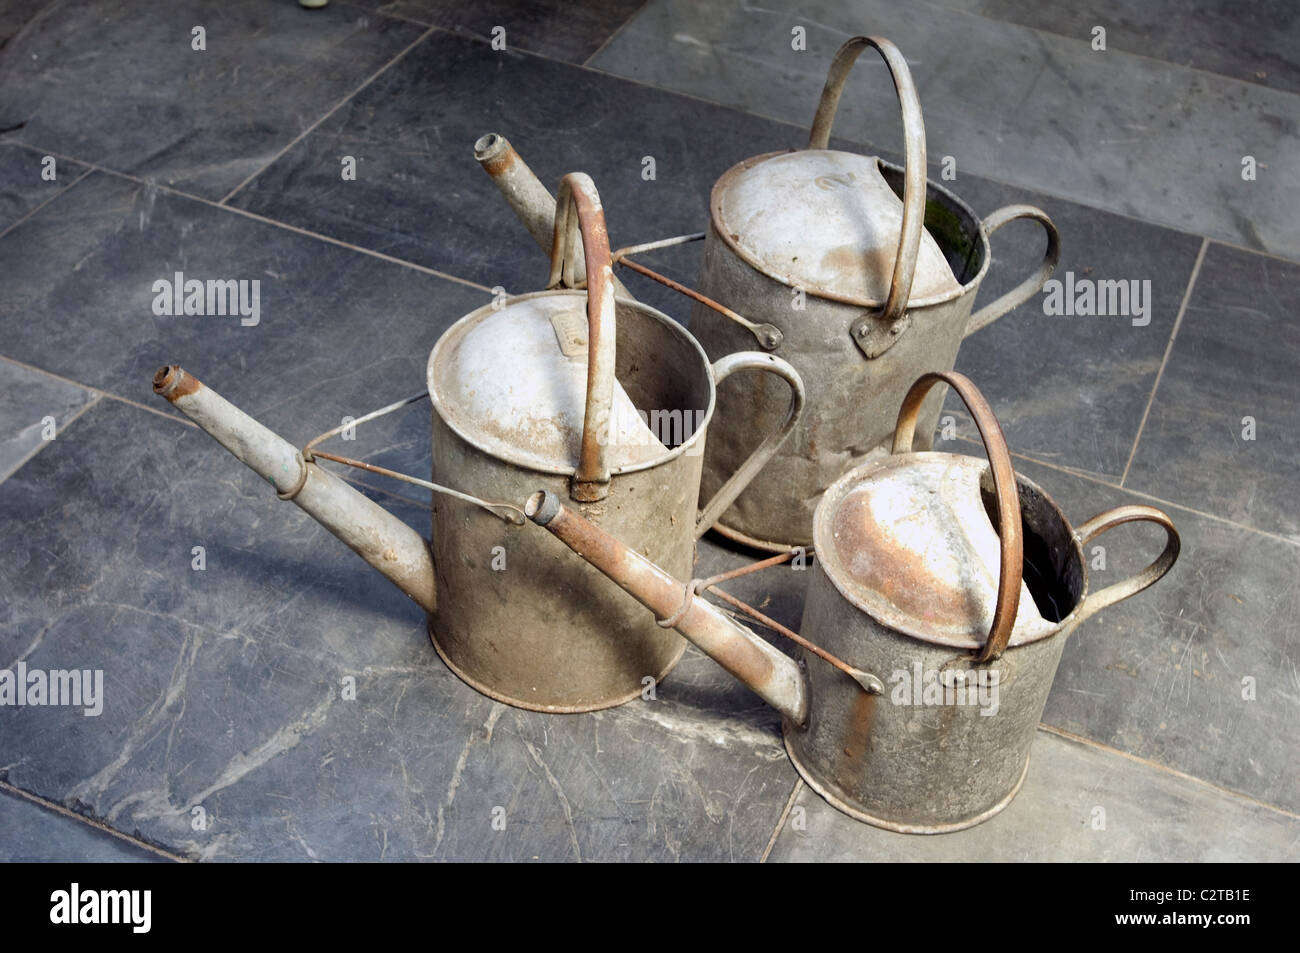 Old 1-gallon, 11/2 gallon and 2 gallon galvanised iron watering cans on a slate floor in a greenhouse Stock Photo